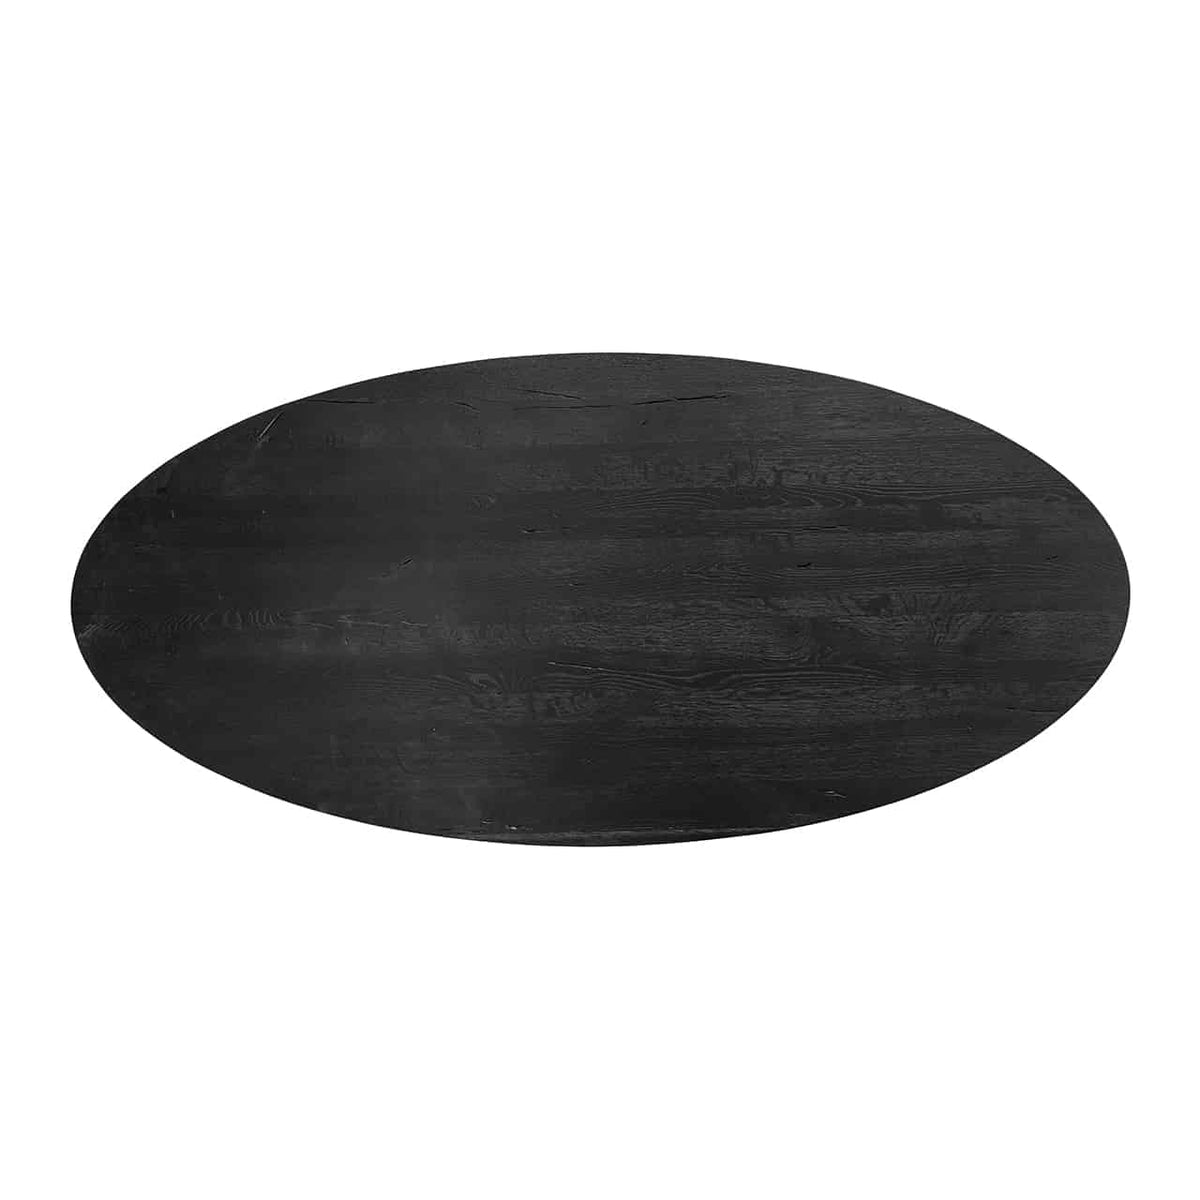 Richmond Interiors dining table top Watson oval 300 dining table